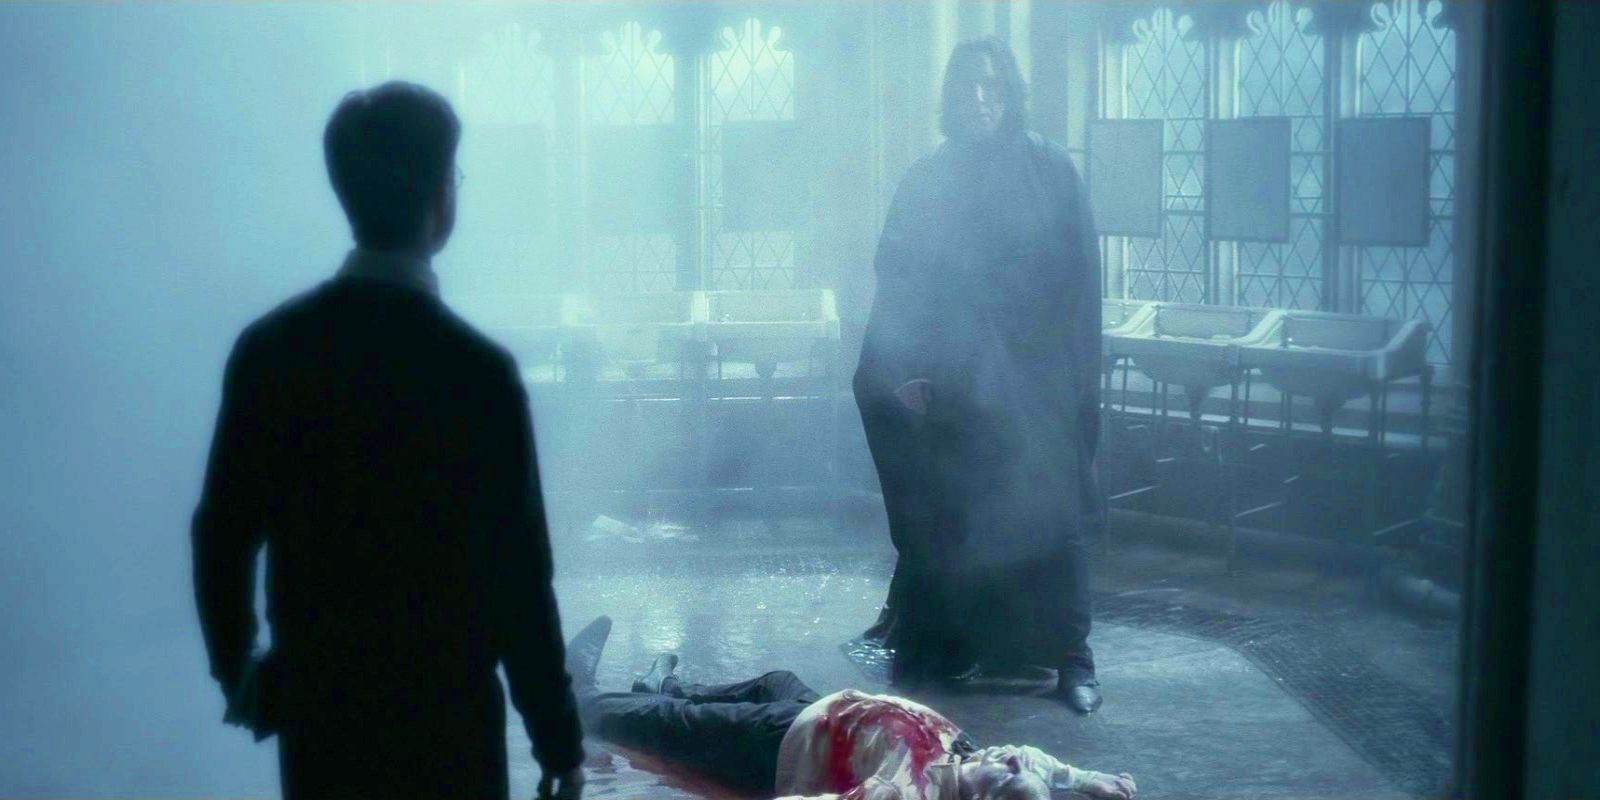 Snape standing over a bloodied Draco Malfoy in Harry Potter and the Half-Blood Prince.